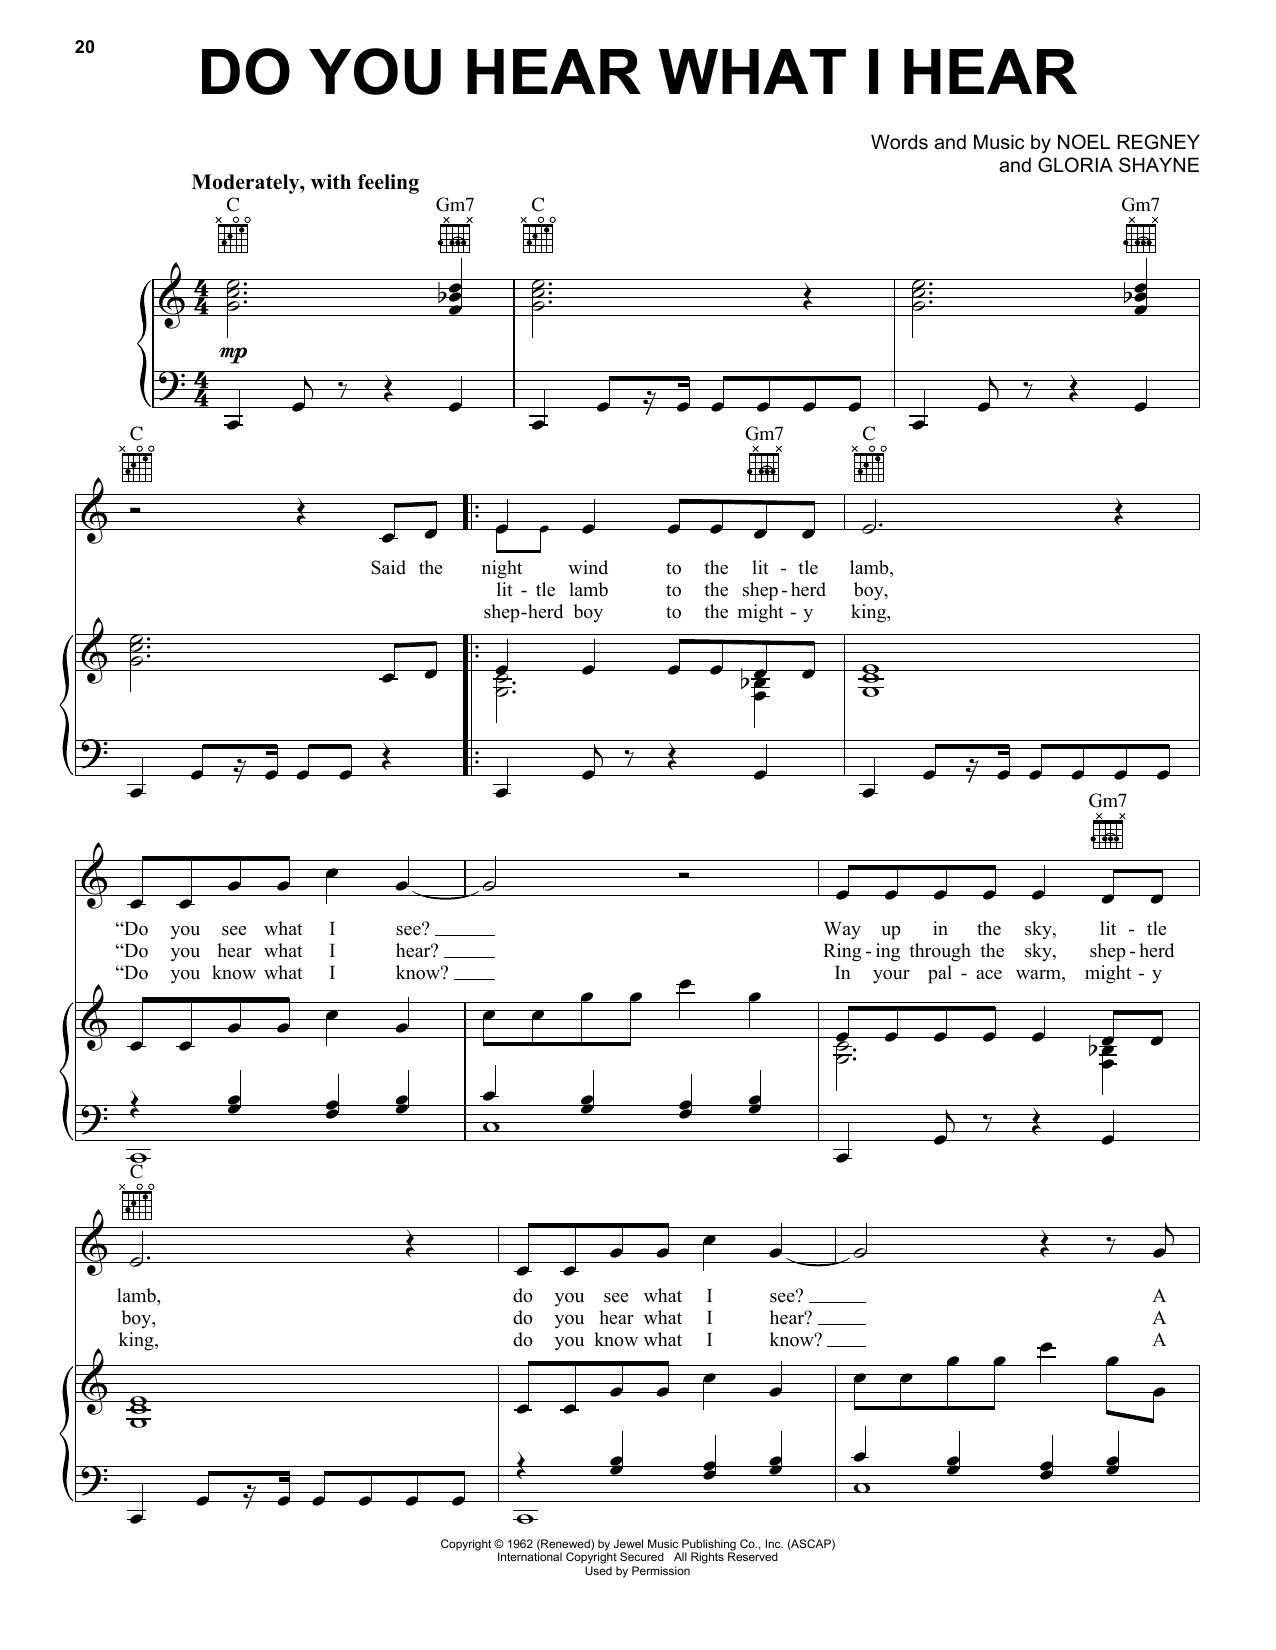 Gloria Shayne Do You Hear What I Hear sheet music preview music notes and score for Guitar with strumming patterns including 2 page(s)